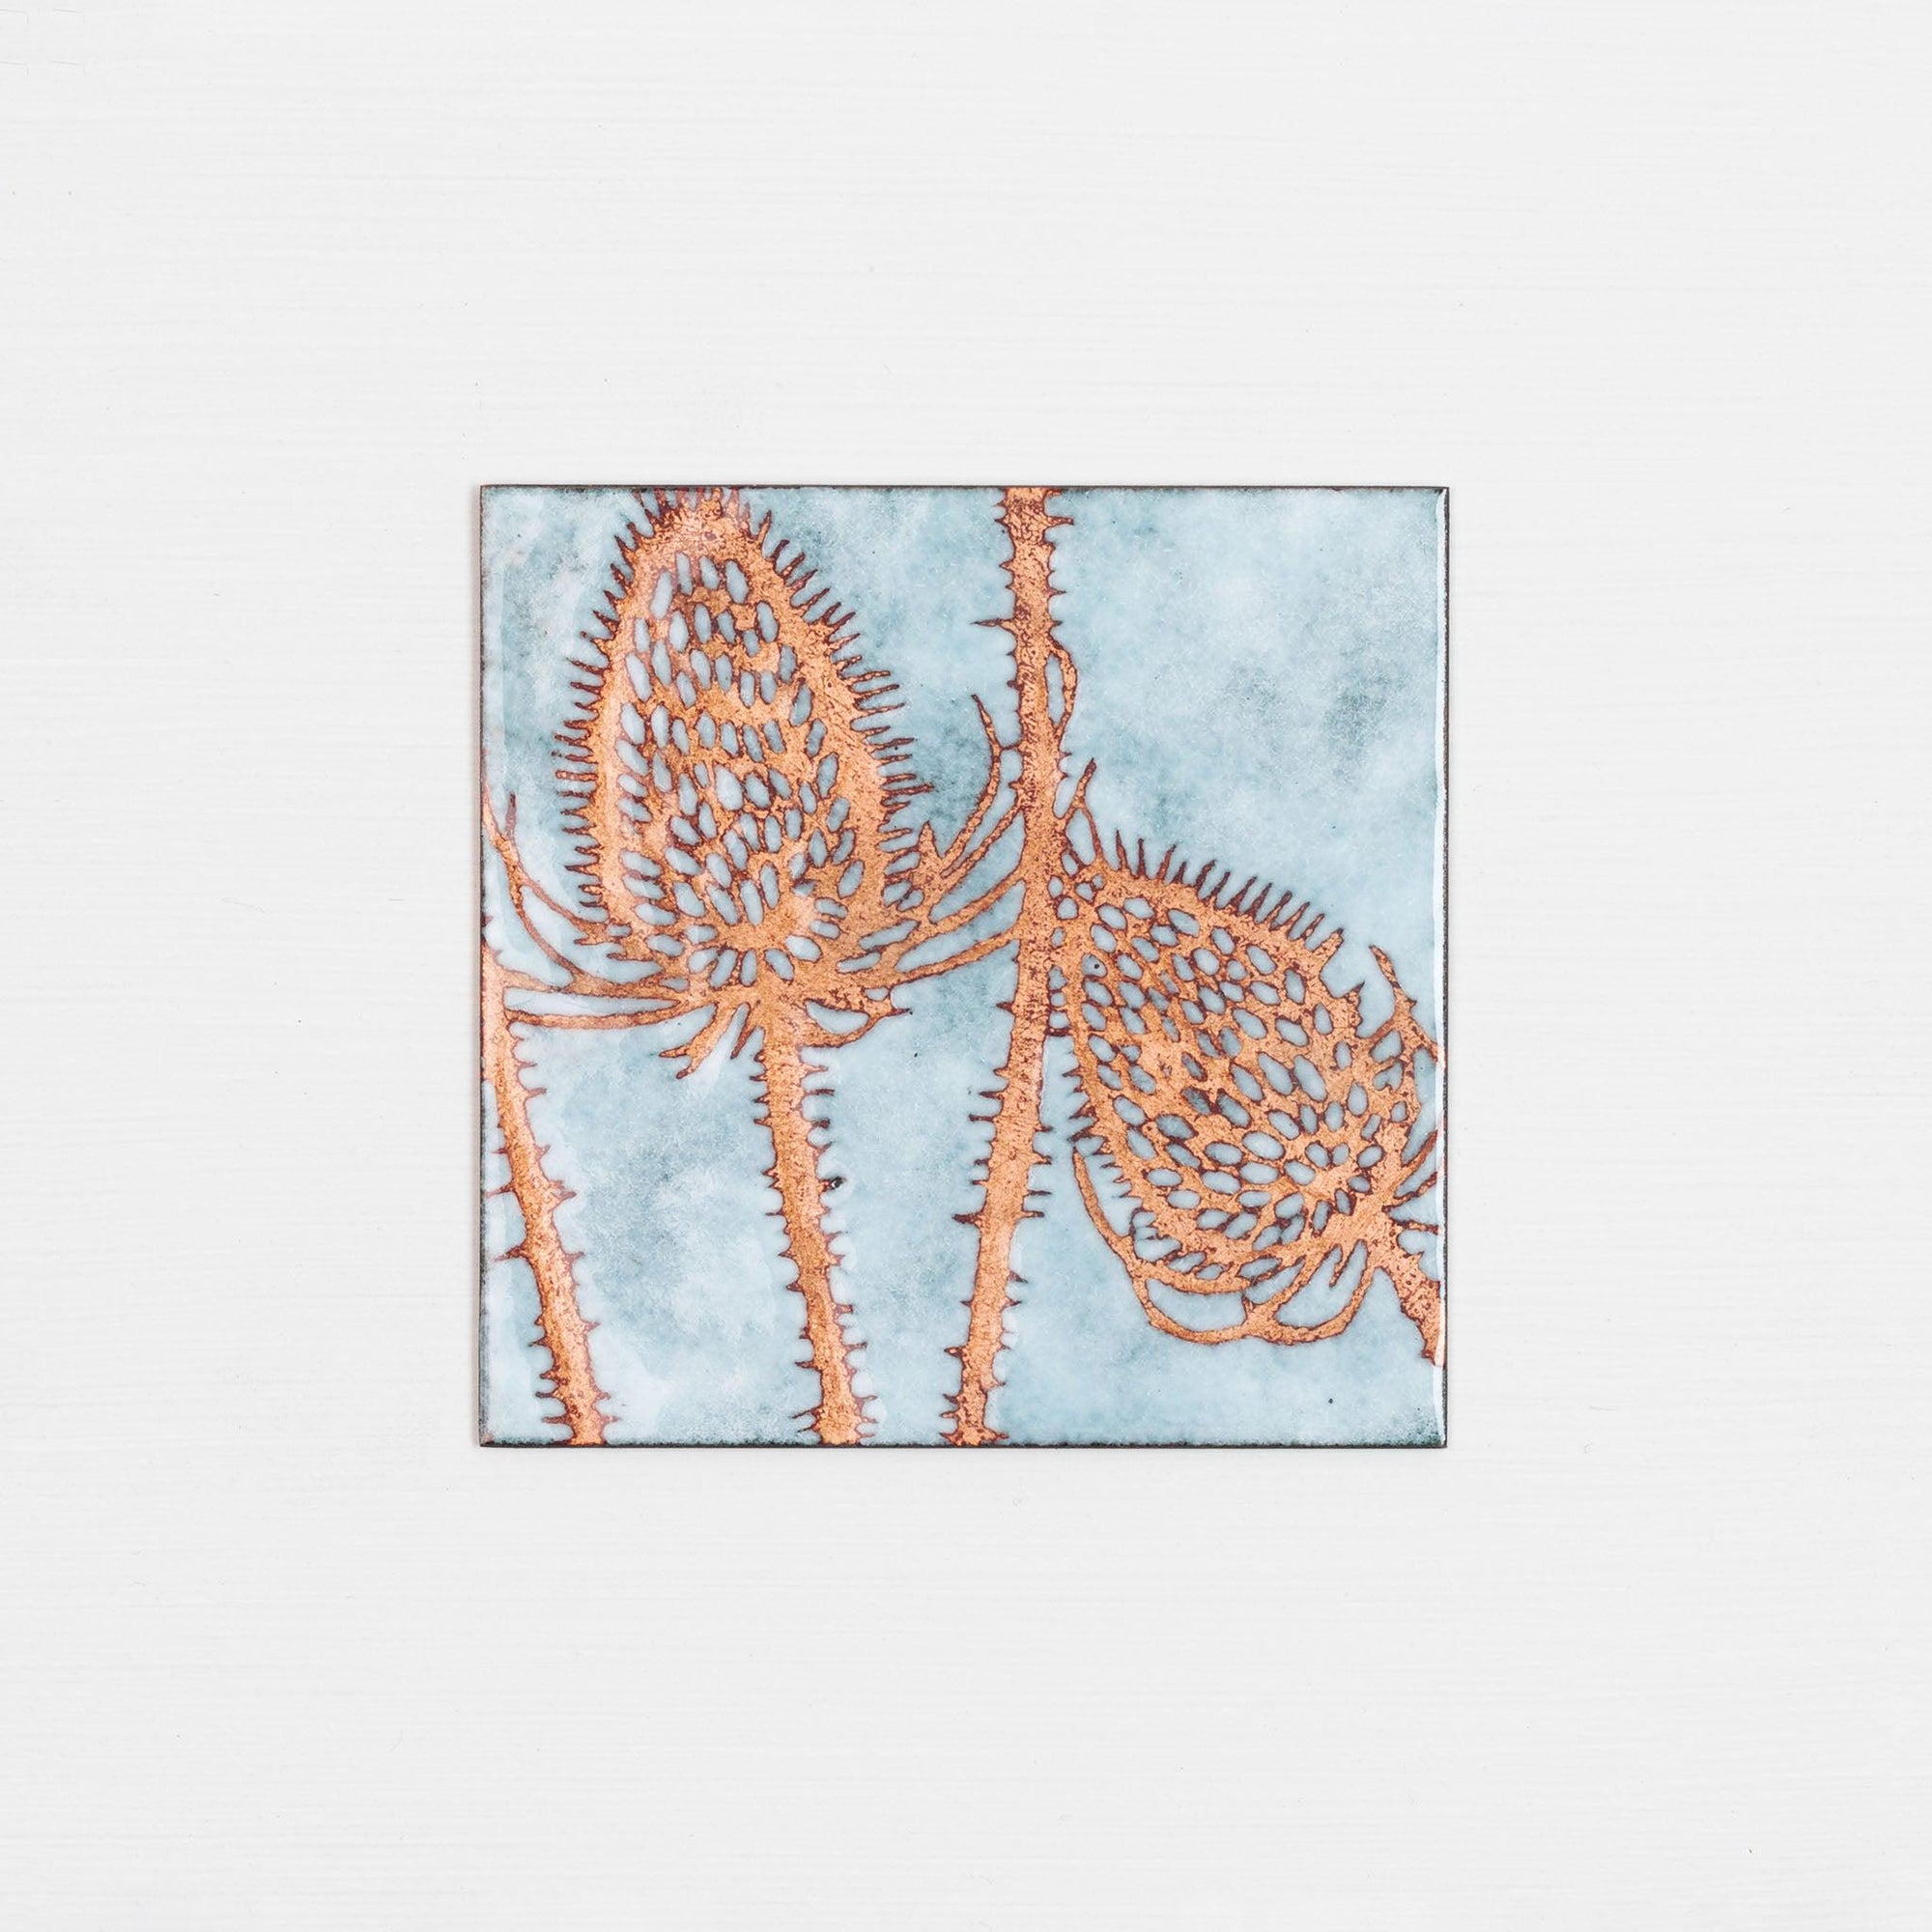 Vitreous enamel on copper panel, by Janine Partington, available from Padstow Gallery Cornwall